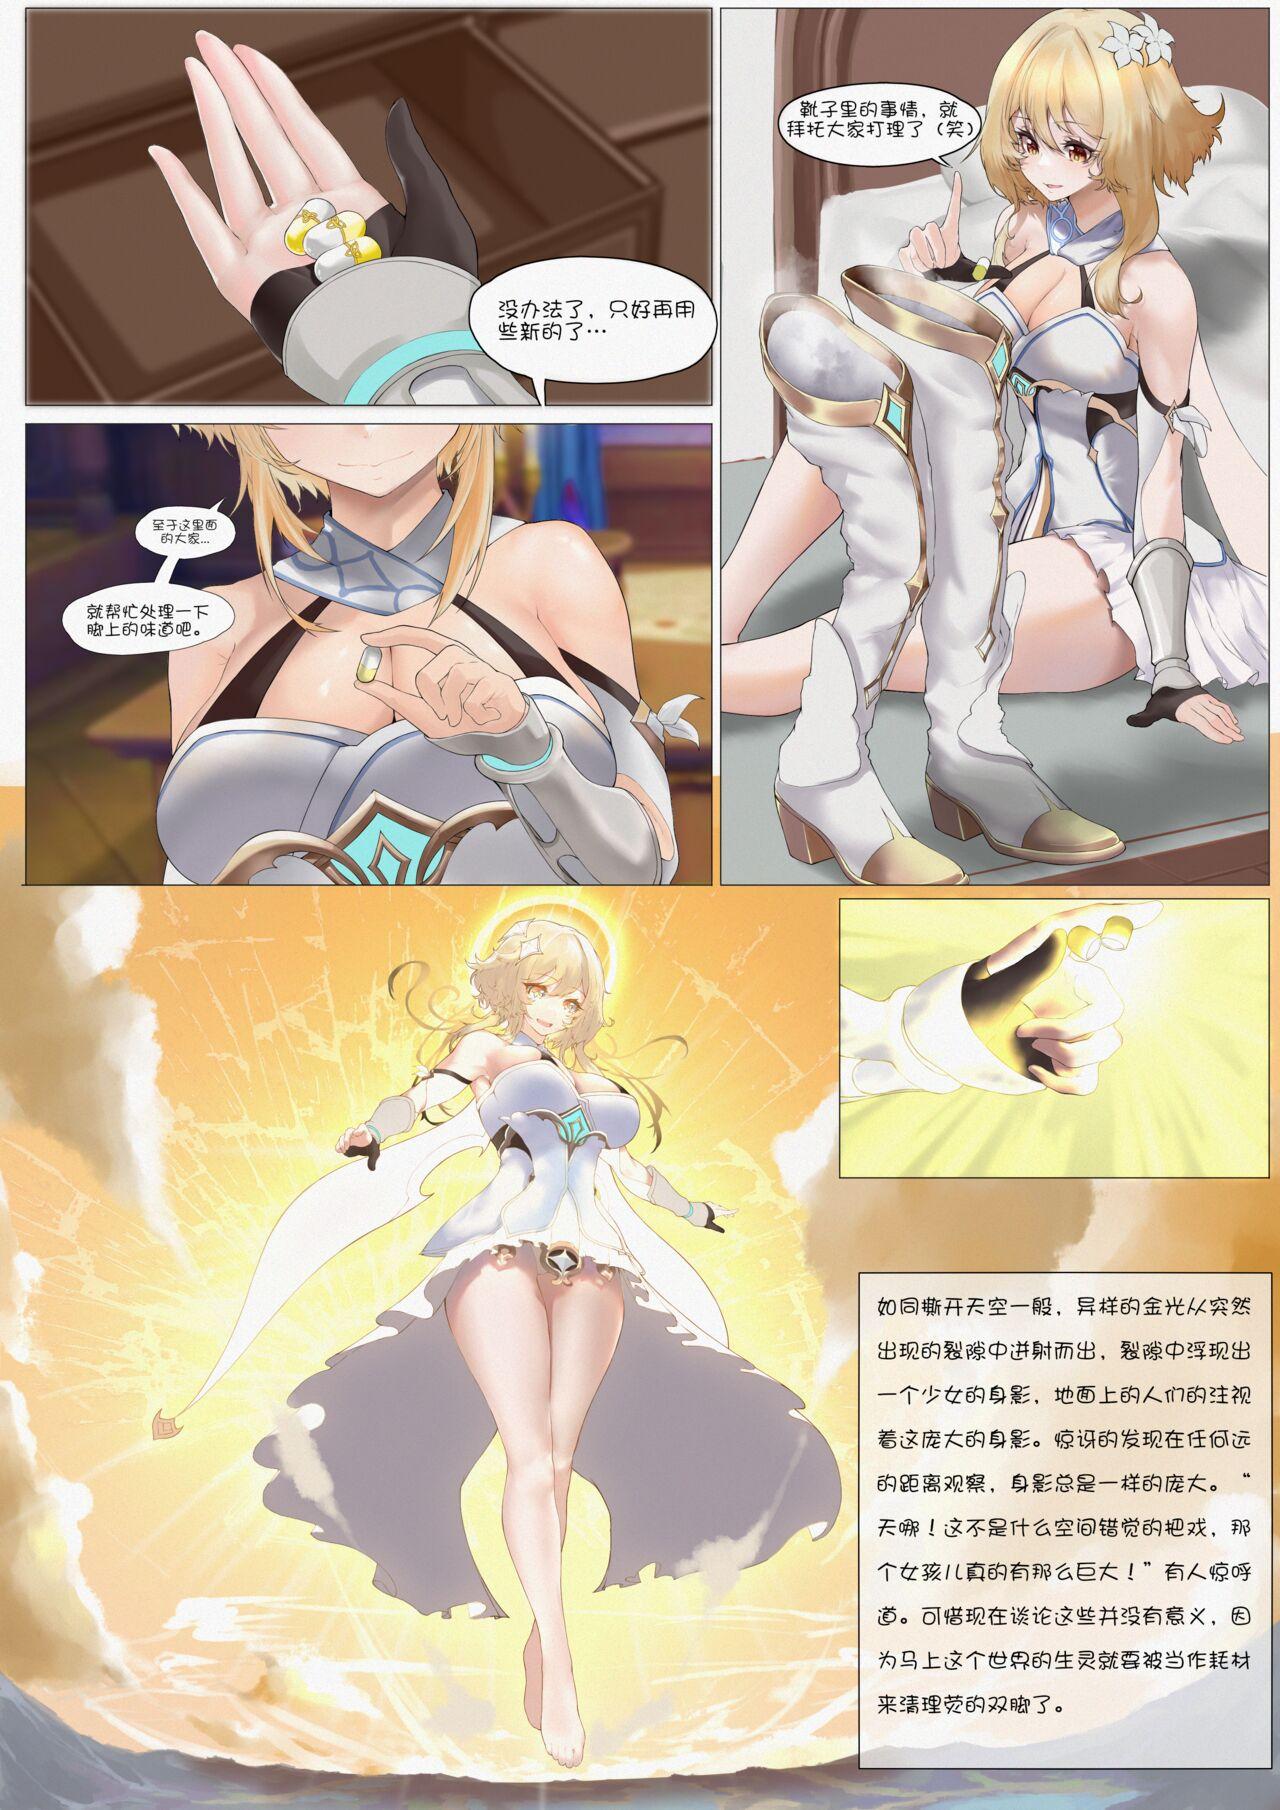 Naughty Just A Little Daily Story About Lumine - Genshin impact Women - Page 4